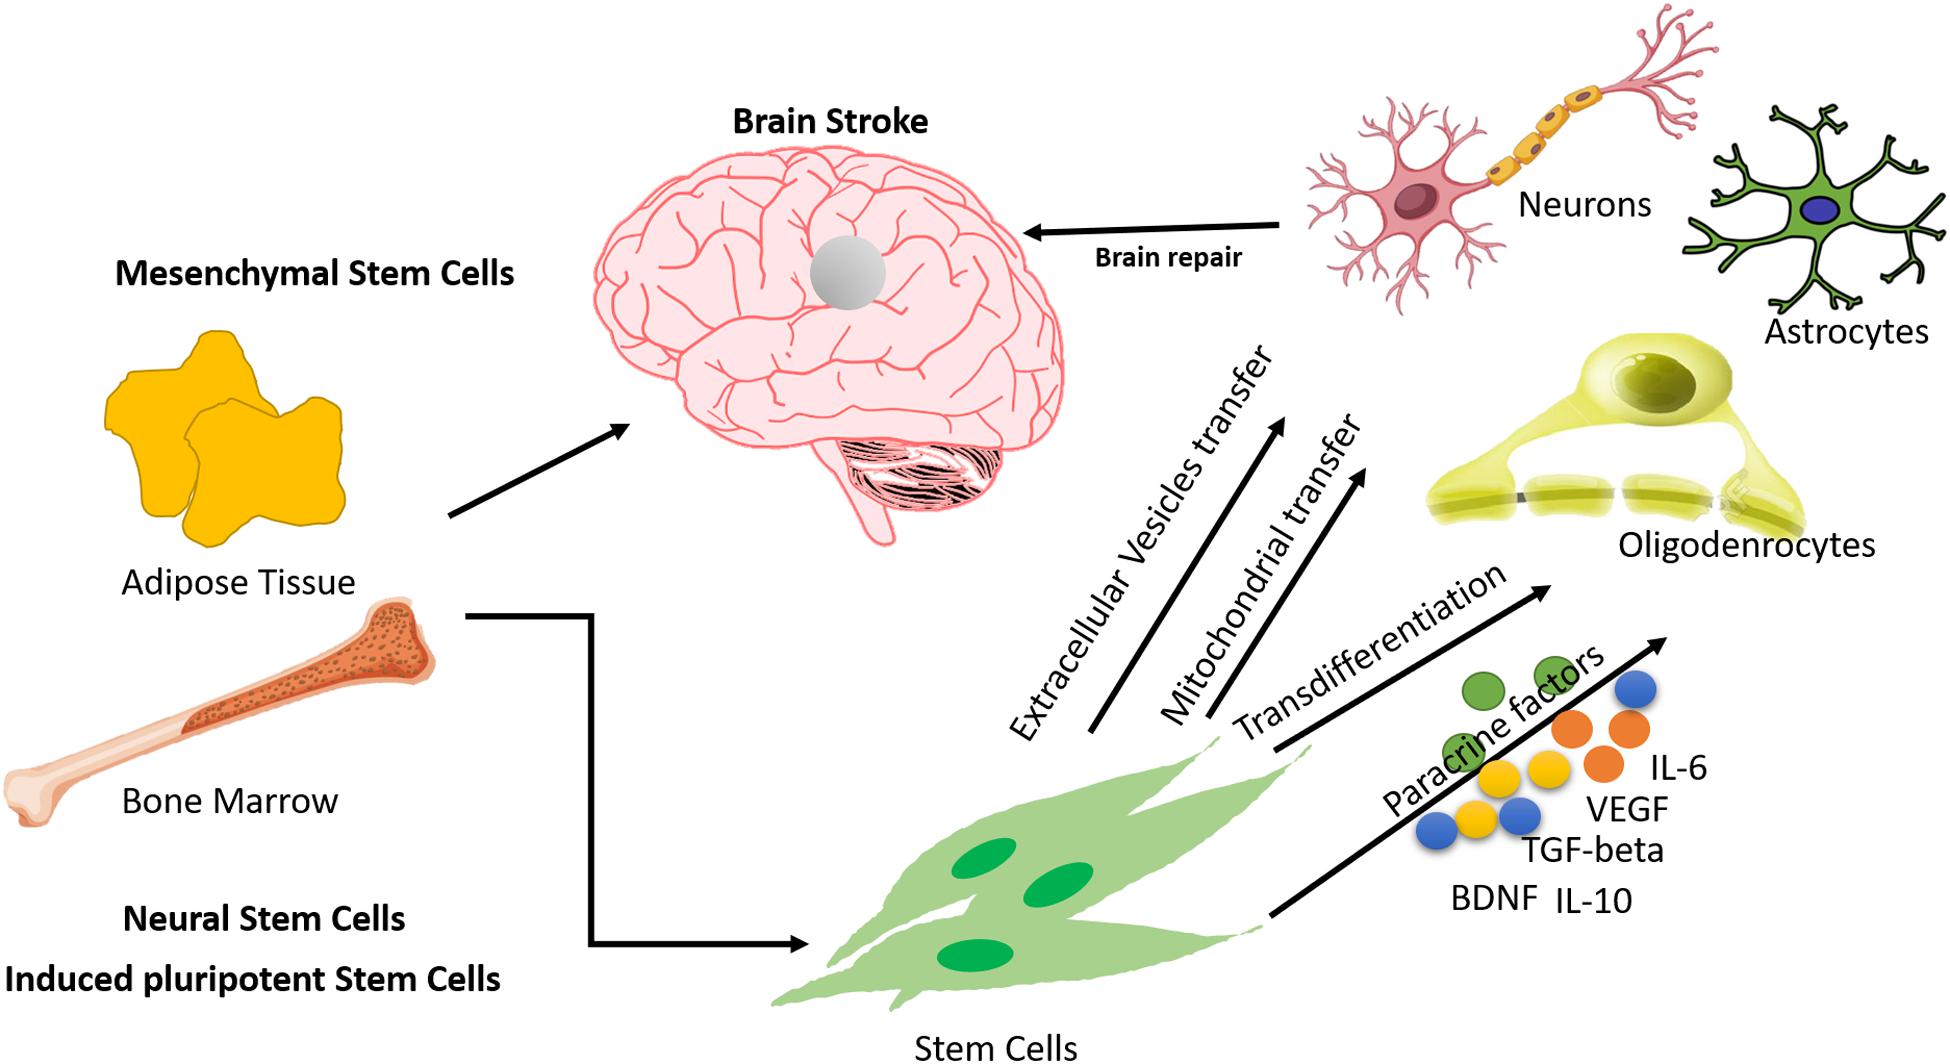 Frontiers | Application of Stem Cells in Stroke: A Multifactorial Approach  | Neuroscience